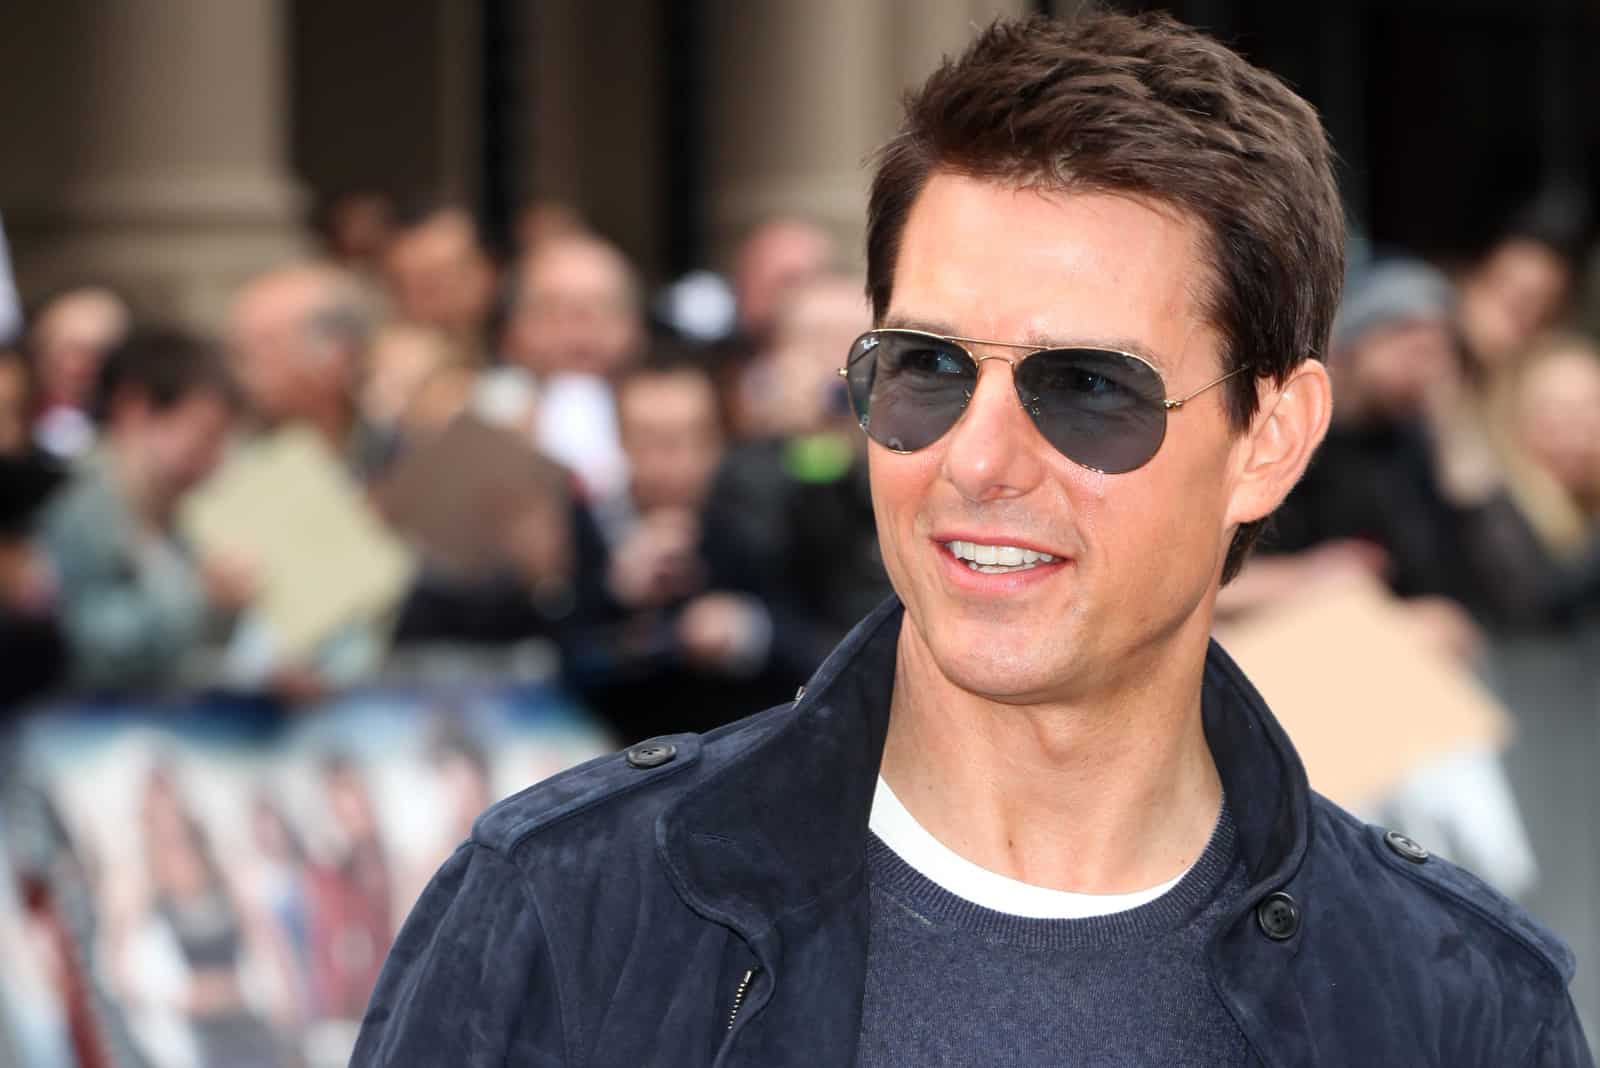 Tom Cruise on the movie premiere